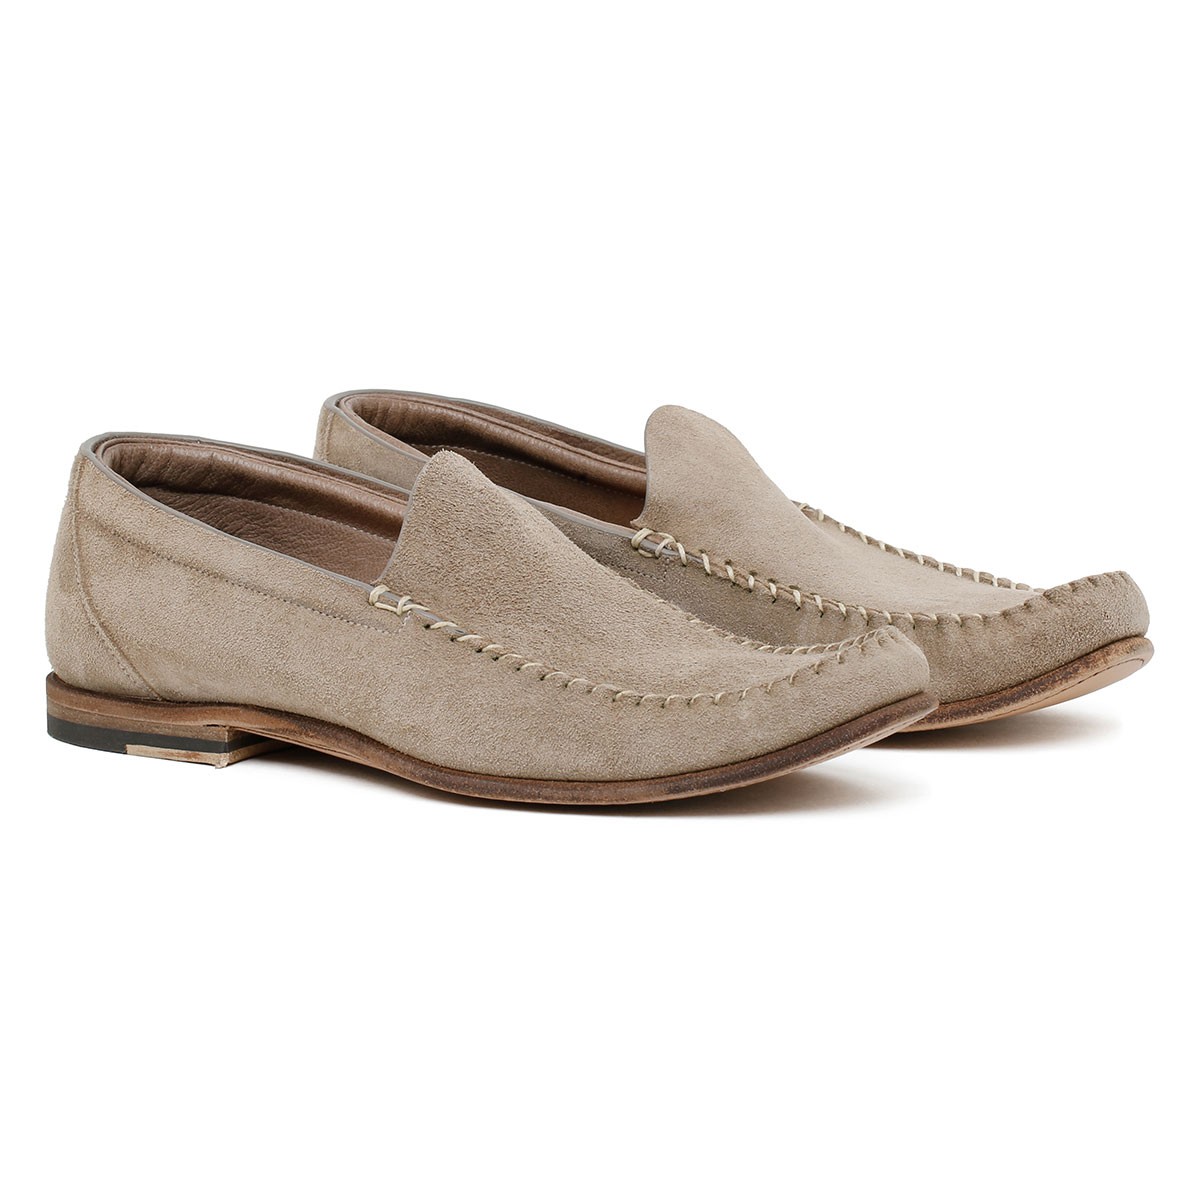 Gray deer leather loafers